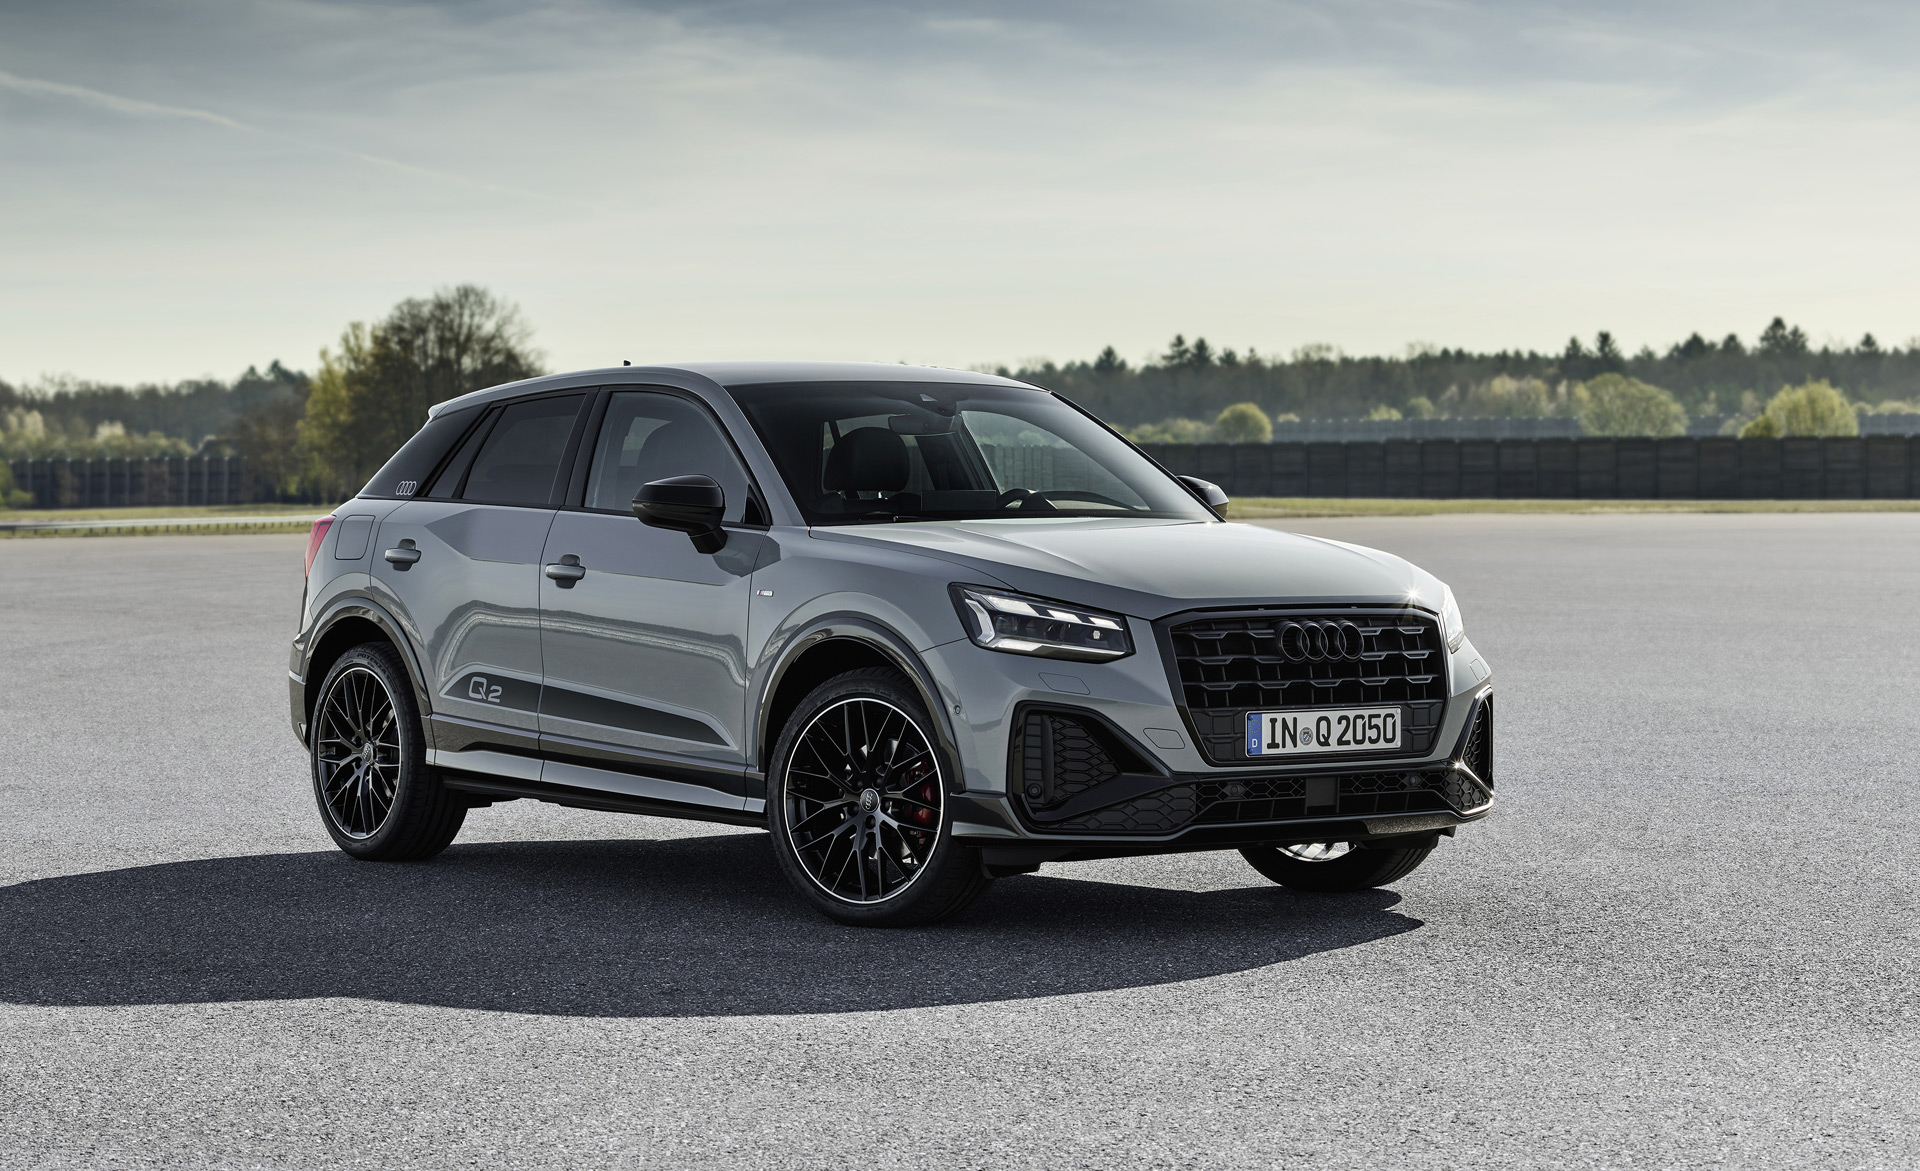 Audi Q2 review - prices, specs and 0-60 time